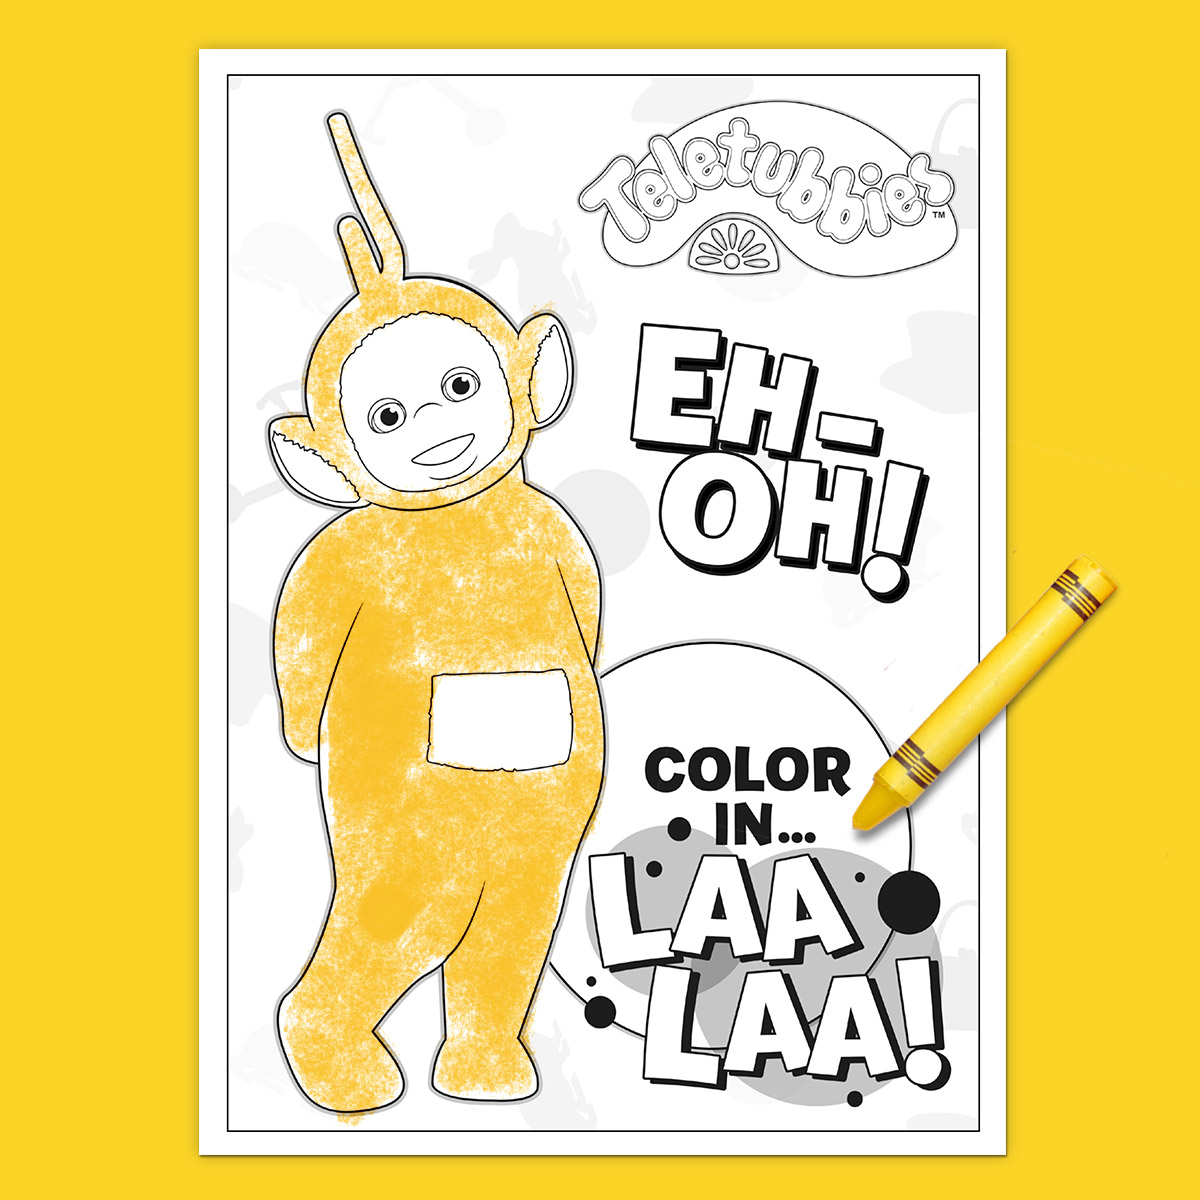 Teletubbies Coloring Page: Laa Laa